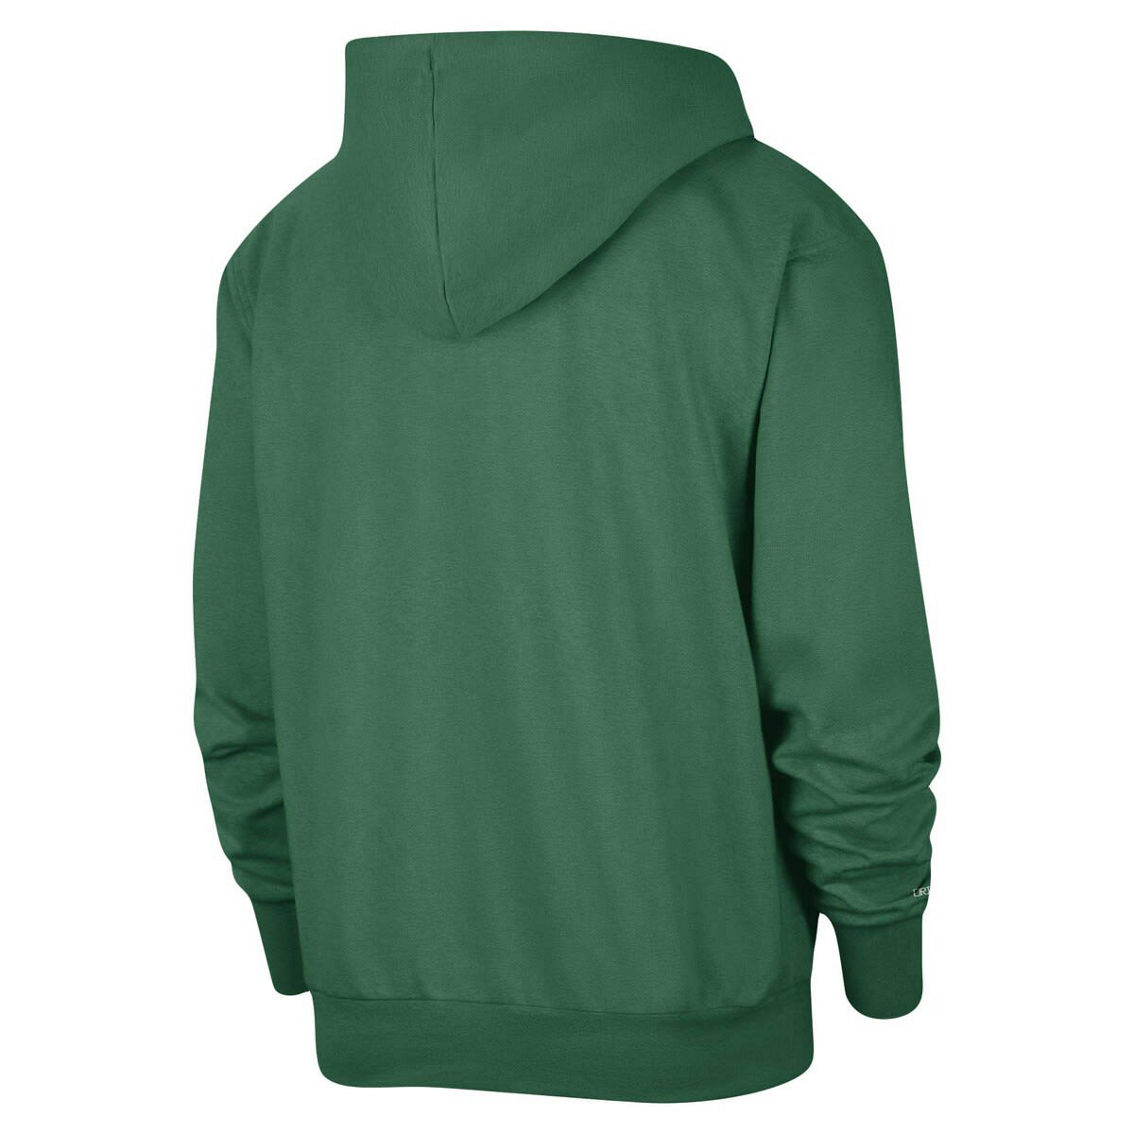 Nike Men's Kelly Green Boston Celtics Authentic Performance Pullover Hoodie - Image 4 of 4